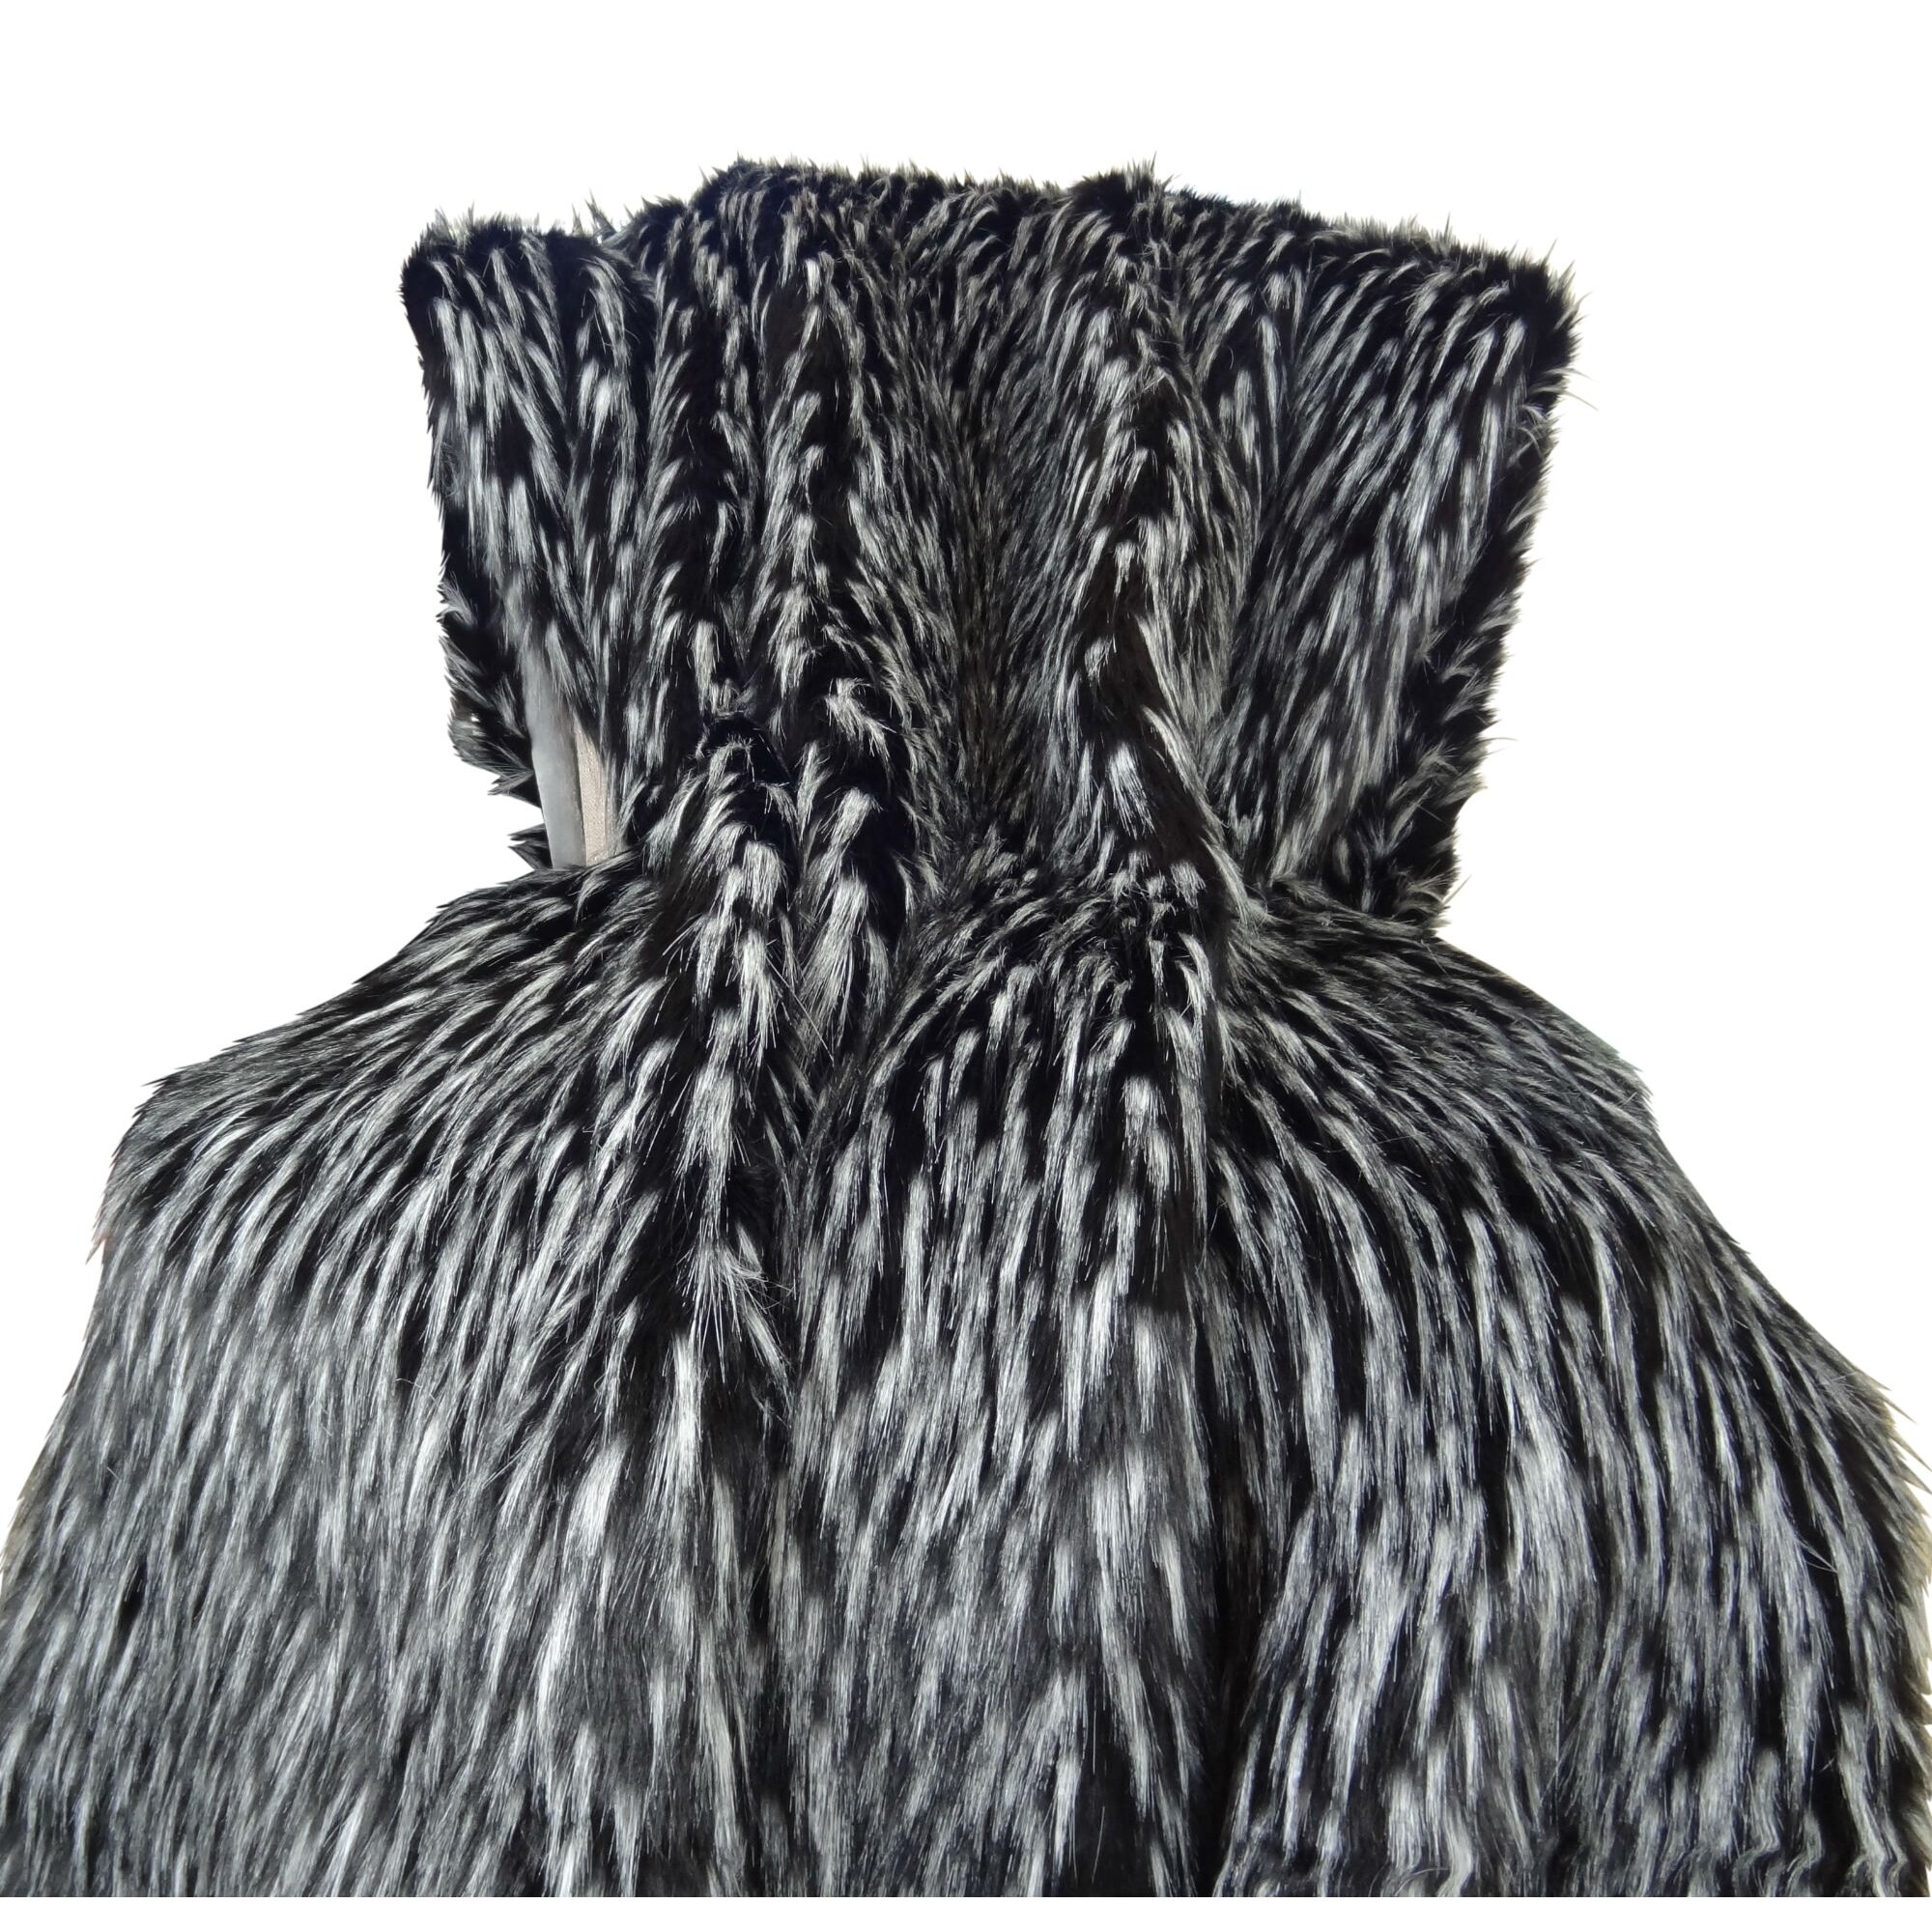 Thomas Collection Black White Faux Fur Throw Blanket Handmade In Usa 16417t Overstock 20901795